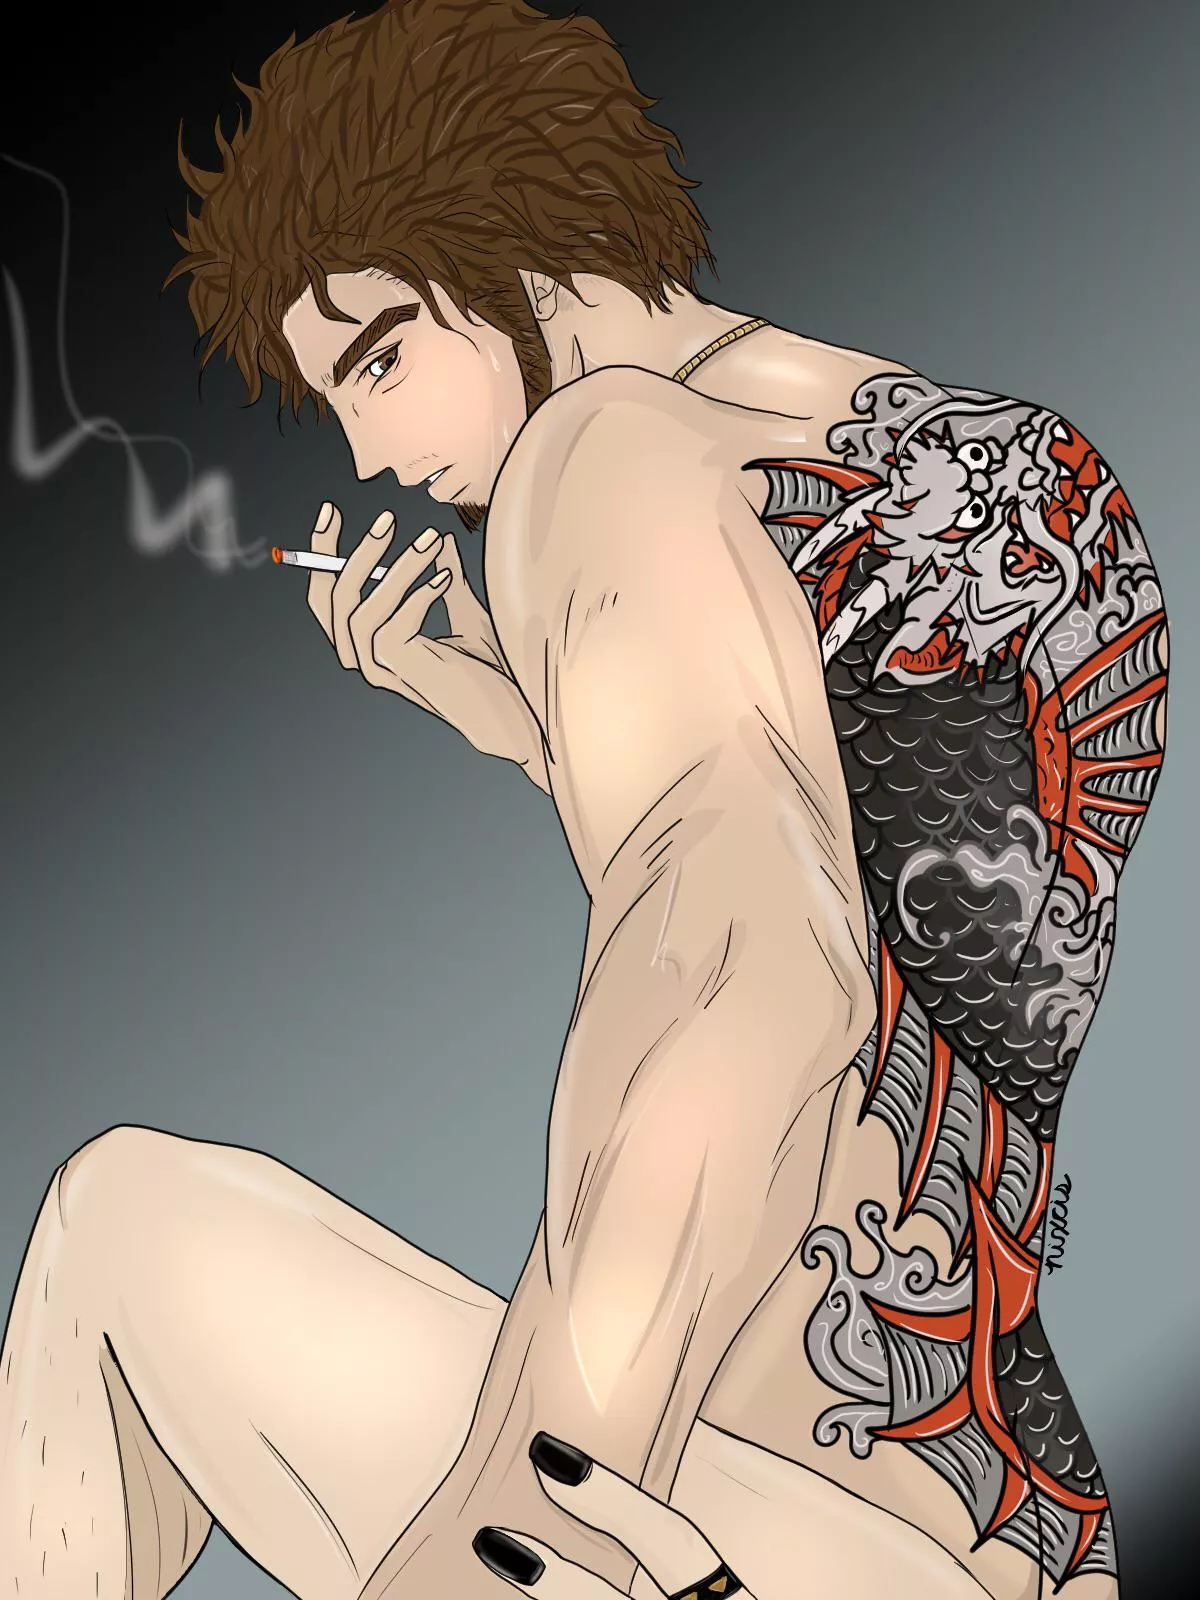 The dragon of rock bottom me yakuza 7 nudes in yaoi | Onlynudes.org